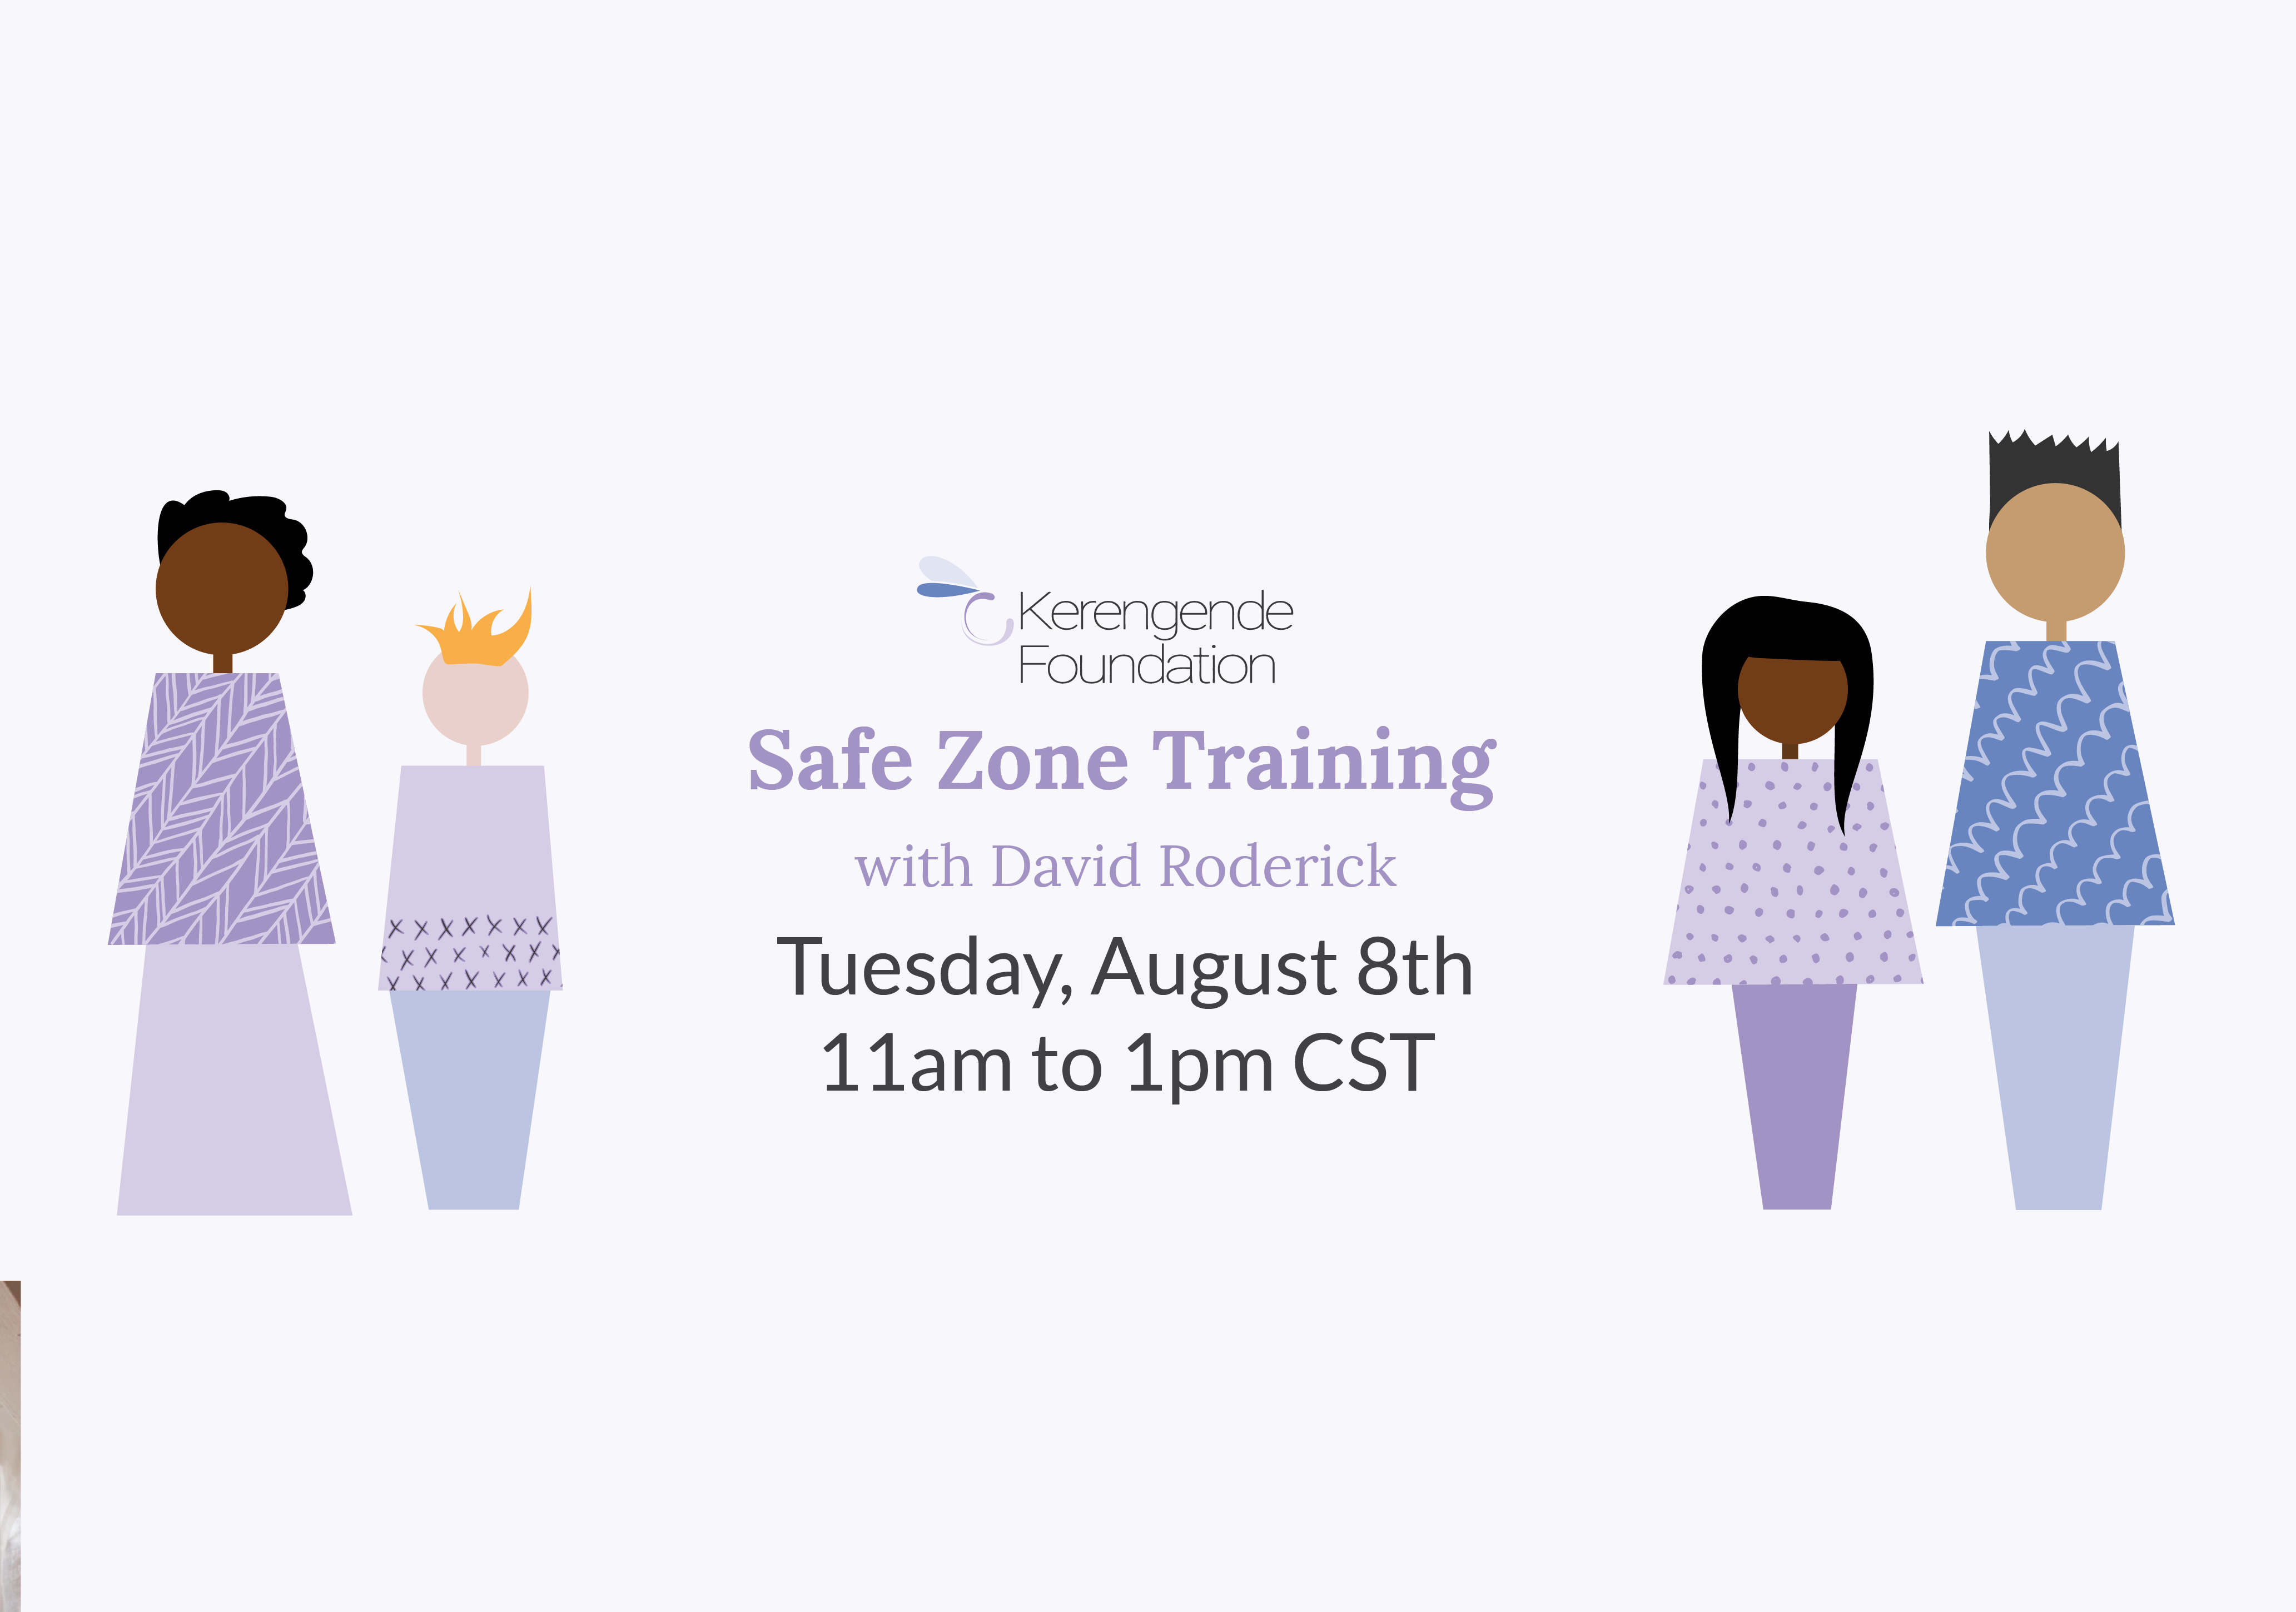 safe zone training with david roderick, tuesday, august 8th, 11am to 1pm CST